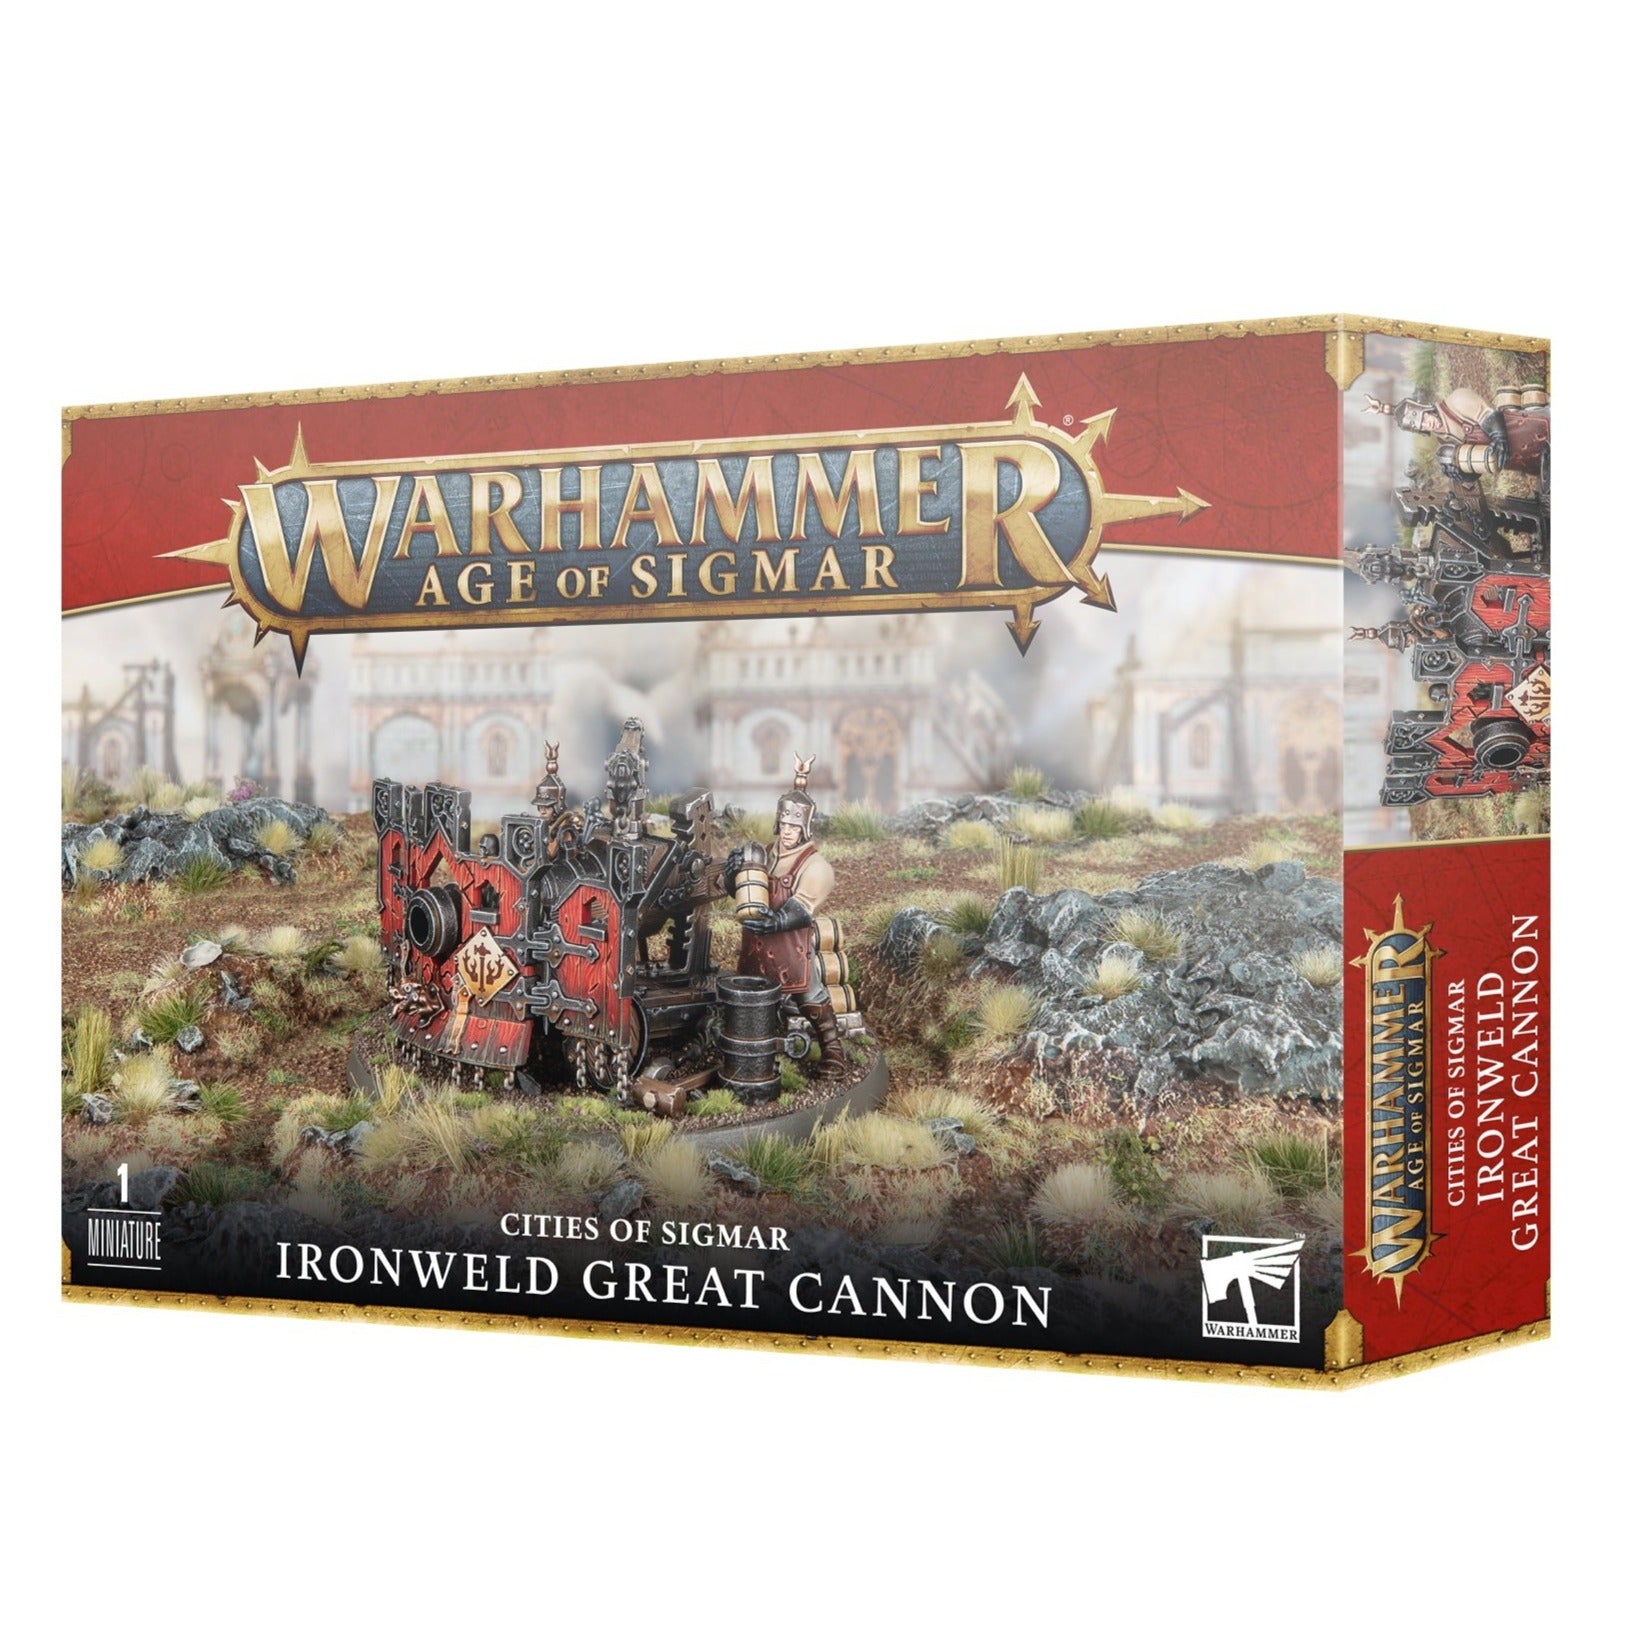 Cities of Sigmar: Ironweld Great Cannon - Release Date 11/11/23 - Loaded Dice Barry Vale of Glamorgan CF64 3HD